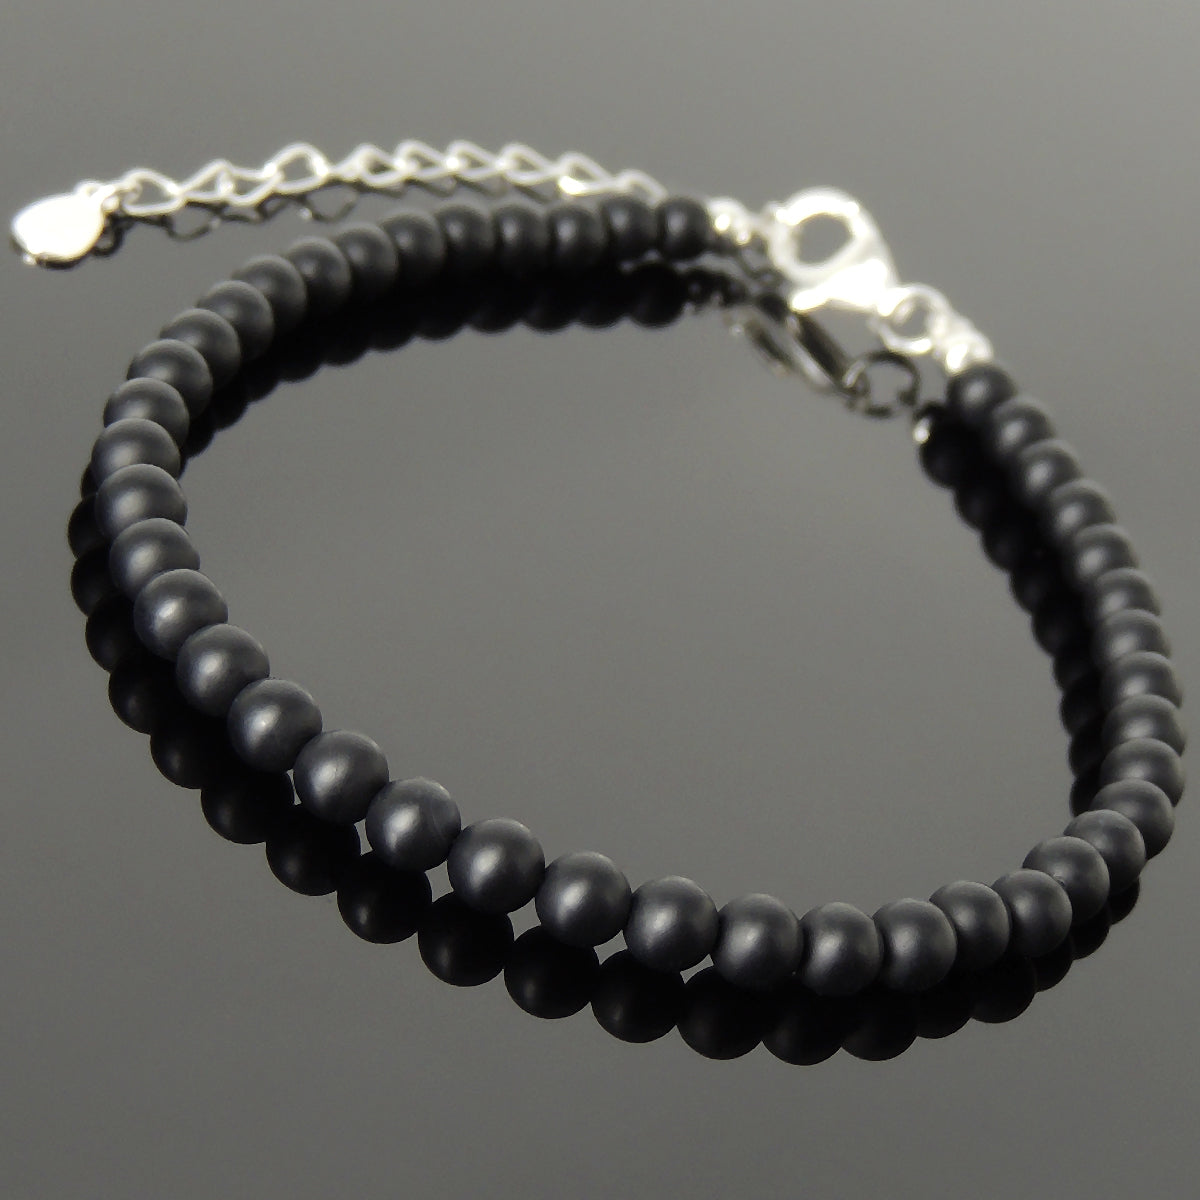 4mm Matte Black Onyx Healing Gemstone Bracelet with S925 Sterling Silver Chain & Clasp - Handmade by Gem & Silver BR1258